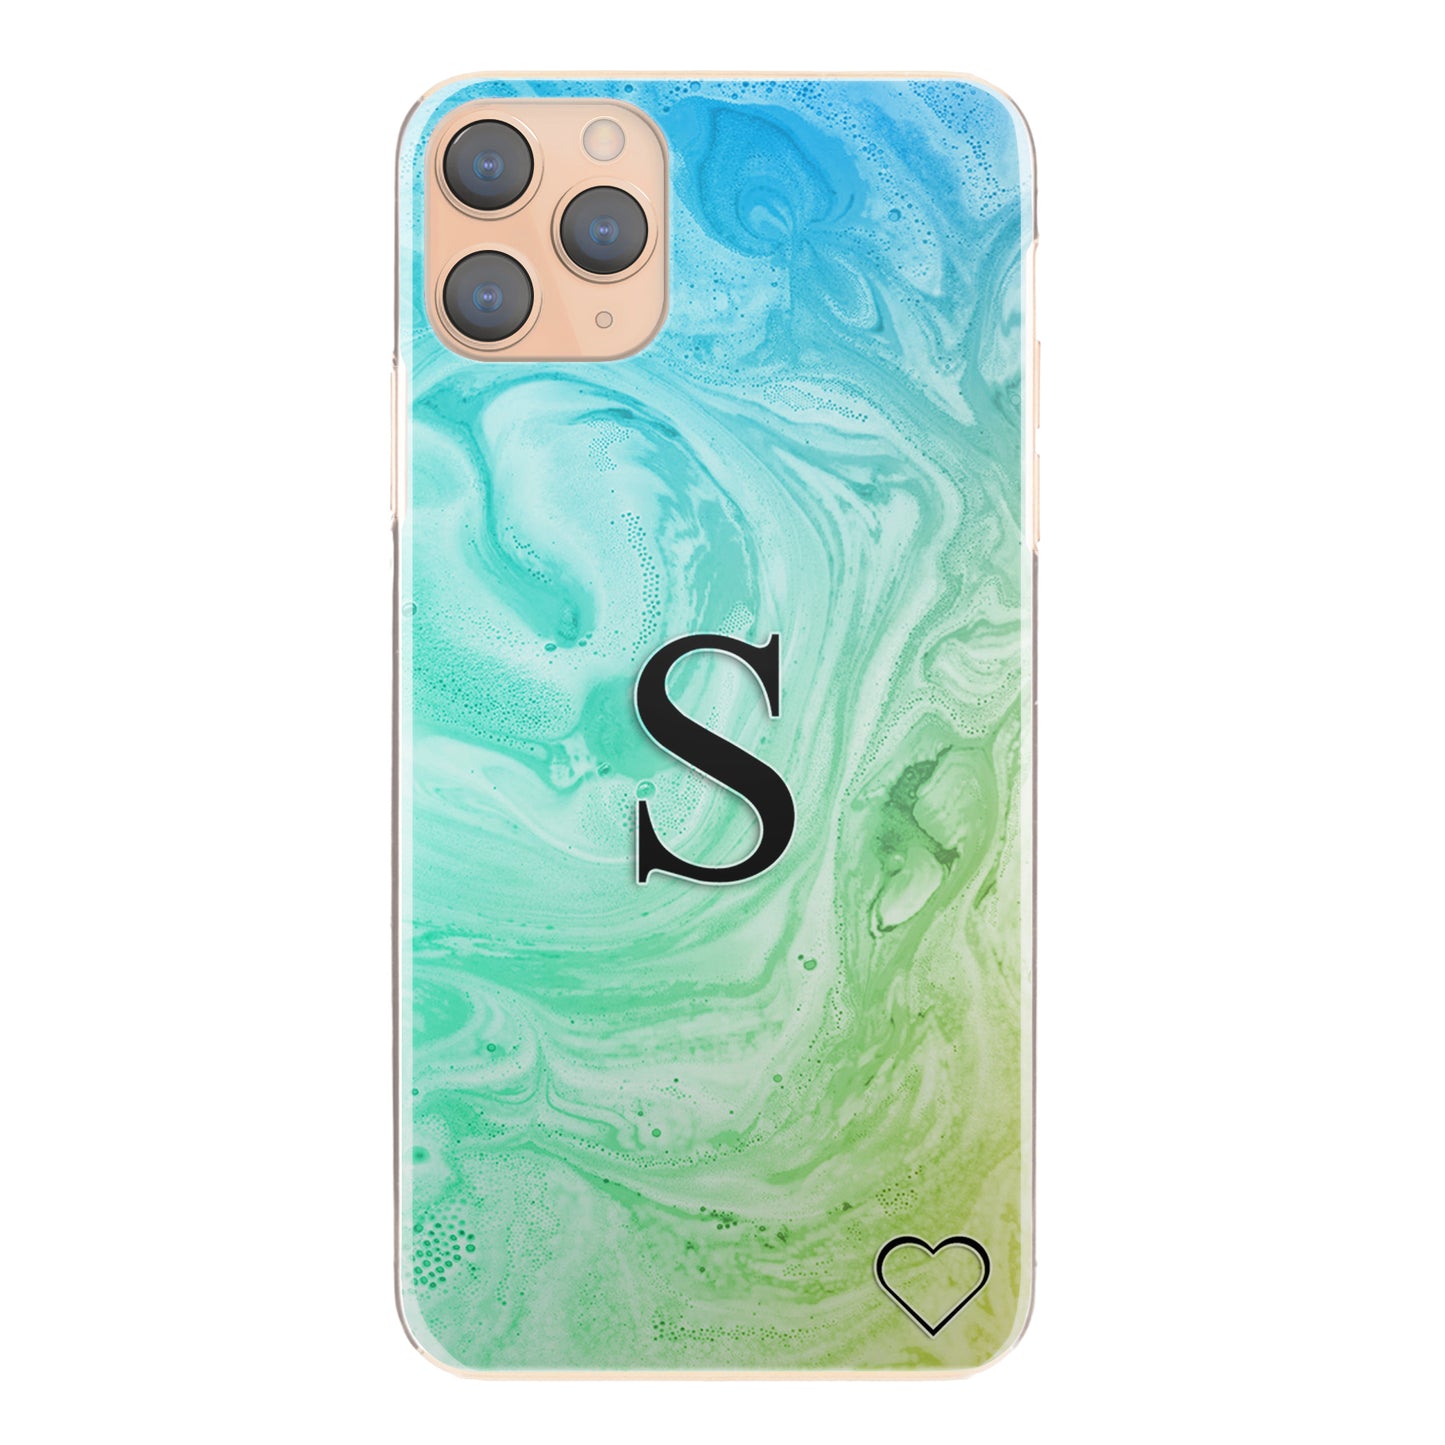 Personalised Nokia Phone Hard Case with Monogram and Heart on Turquoise Gradient Swirled Marble 